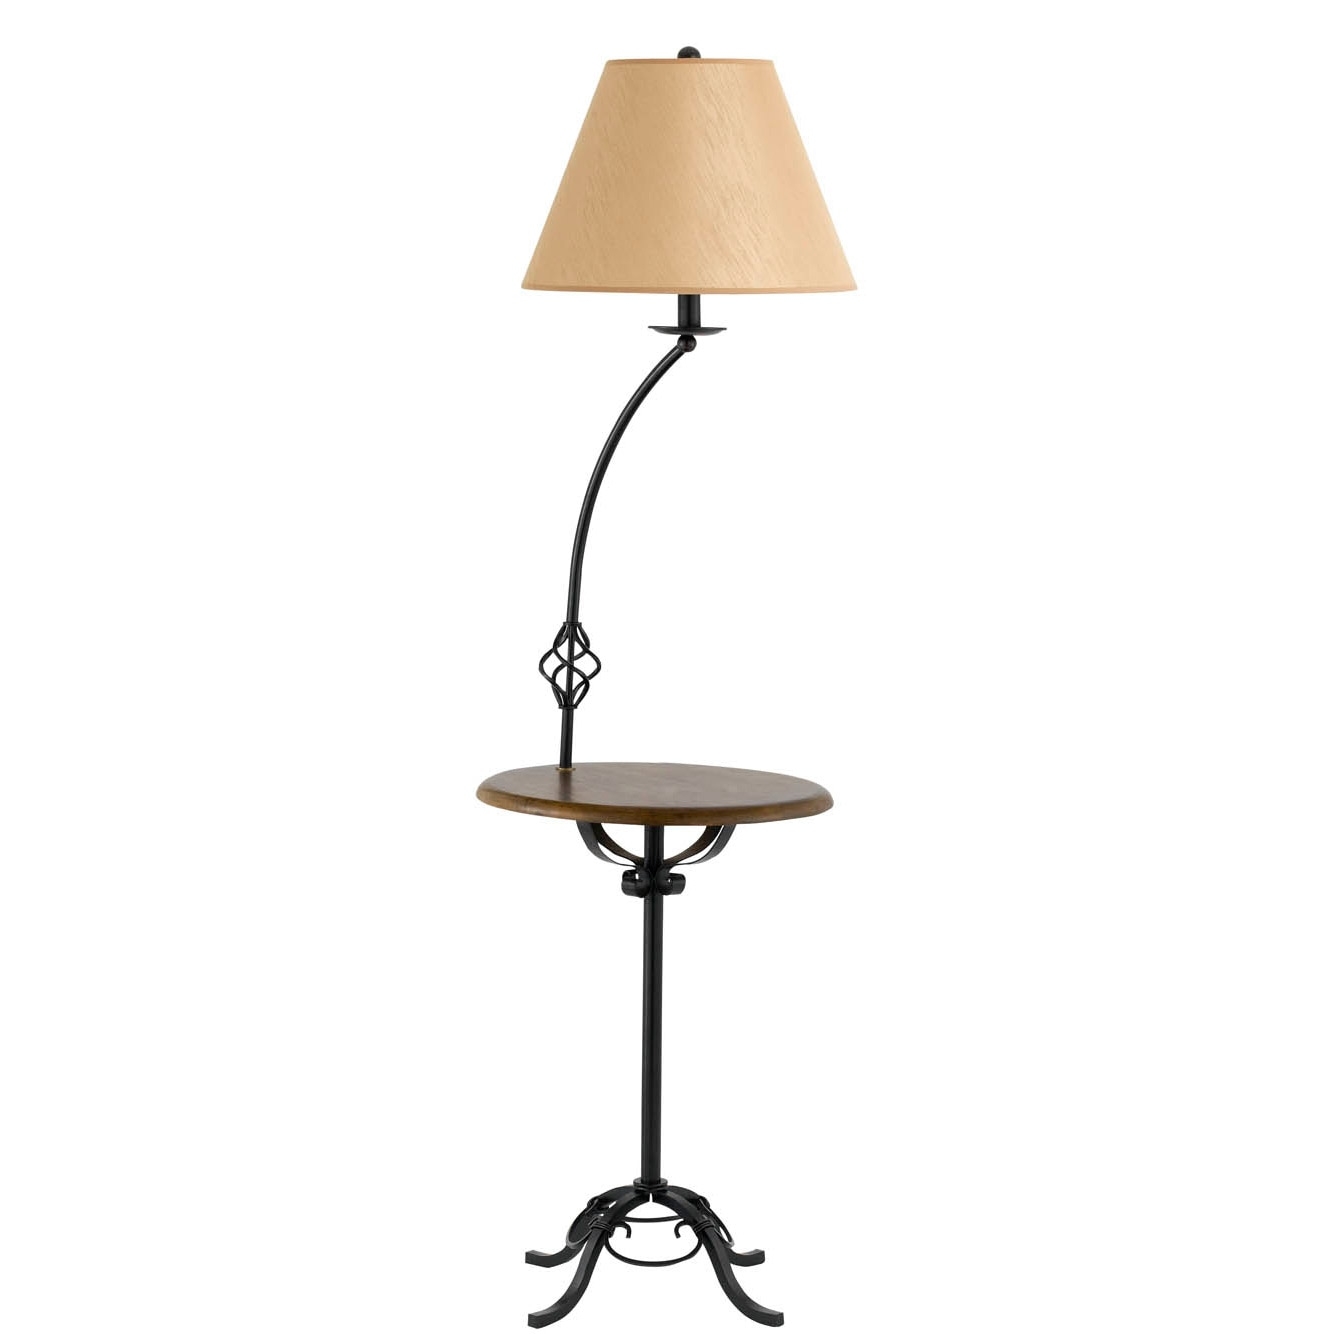 Floor Lamp with Tray Table